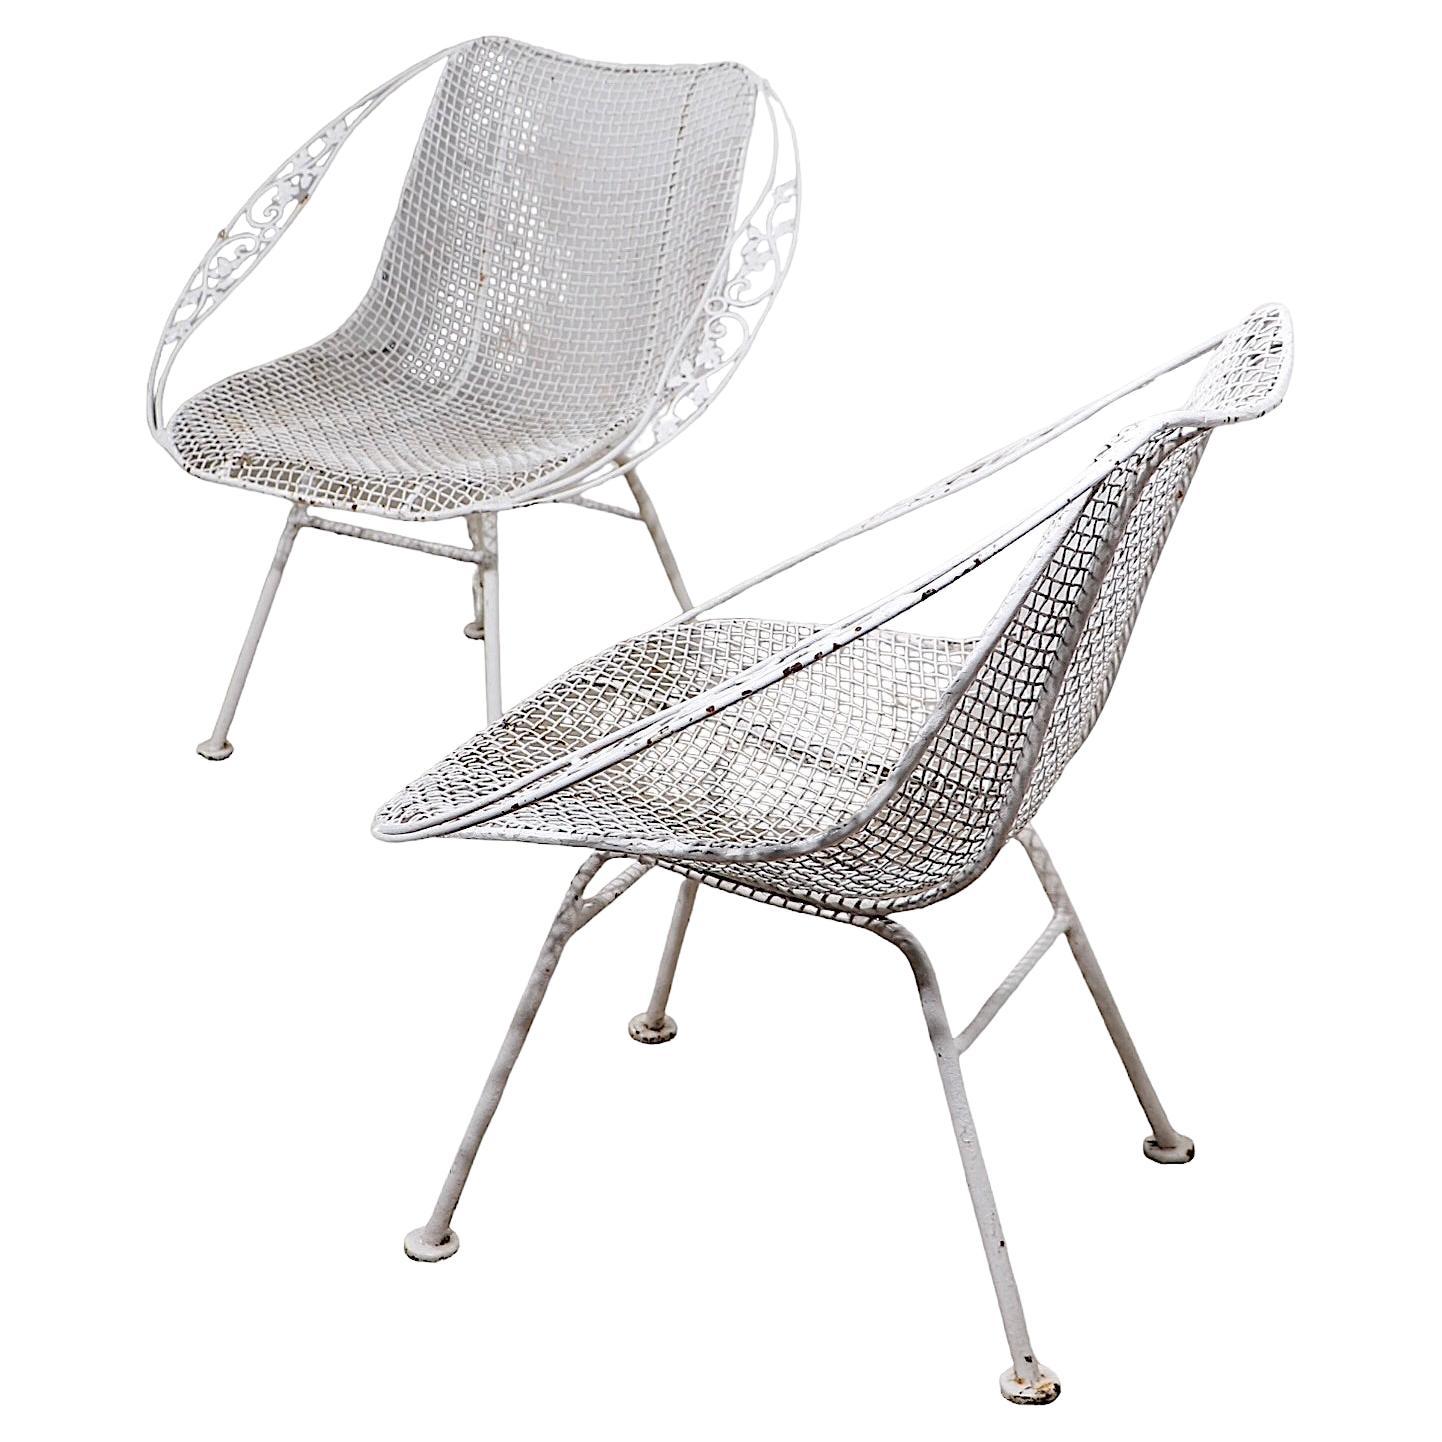 Pr. Sculptura Chantilly Rose Wrought Iron Chairs by Woodard c. 1950's For Sale